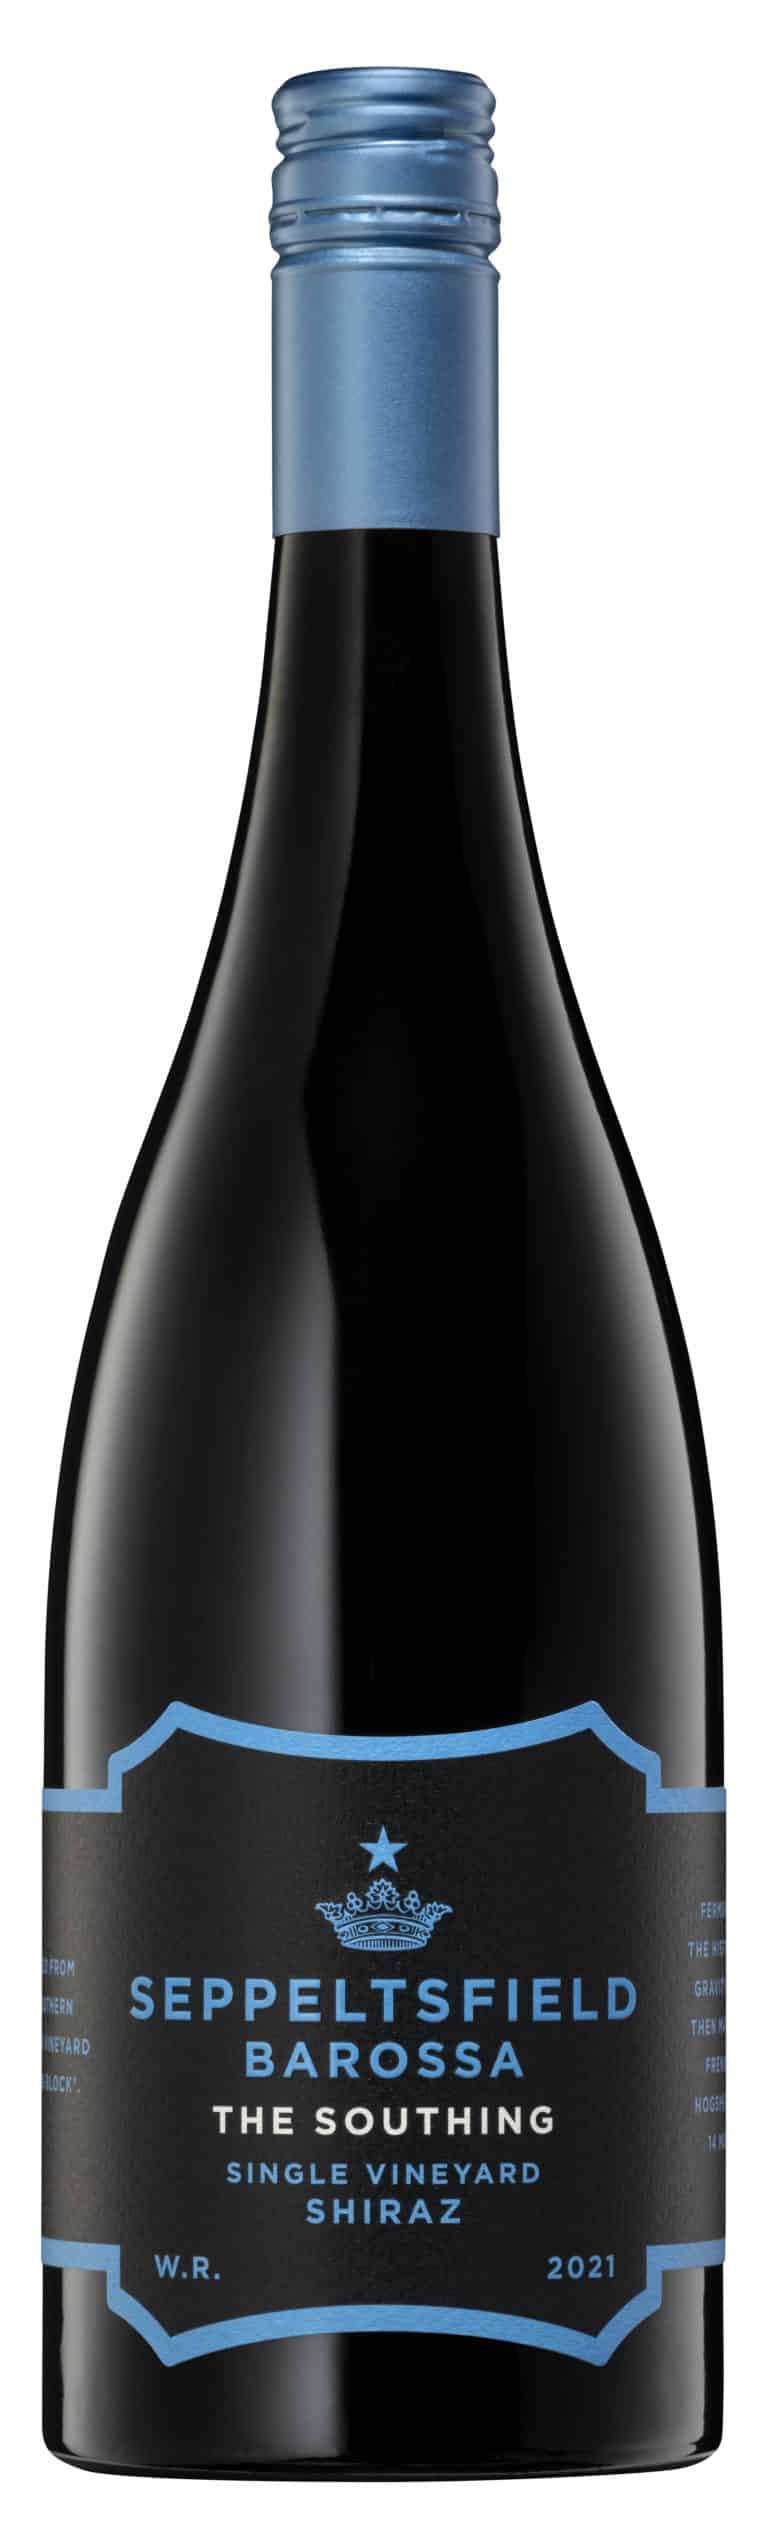 Seppeltsfield The Southing Shiraz 2021